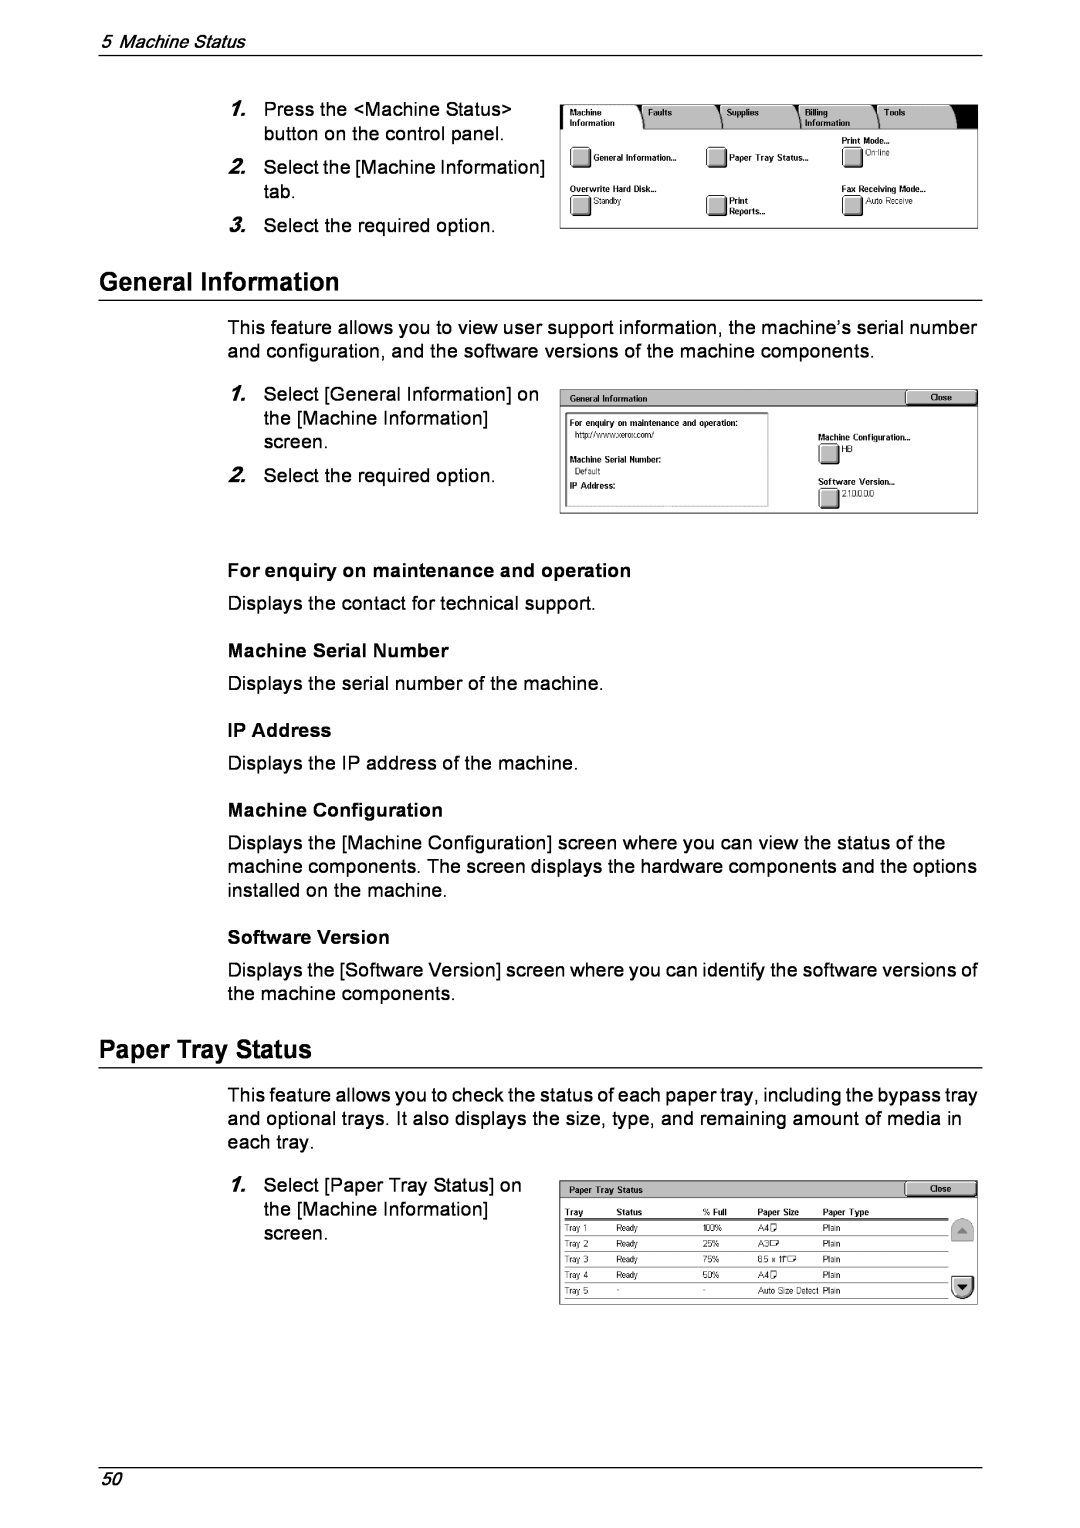 Xerox 5222 manual General Information, Paper Tray Status, For enquiry on maintenance and operation, Machine Serial Number 